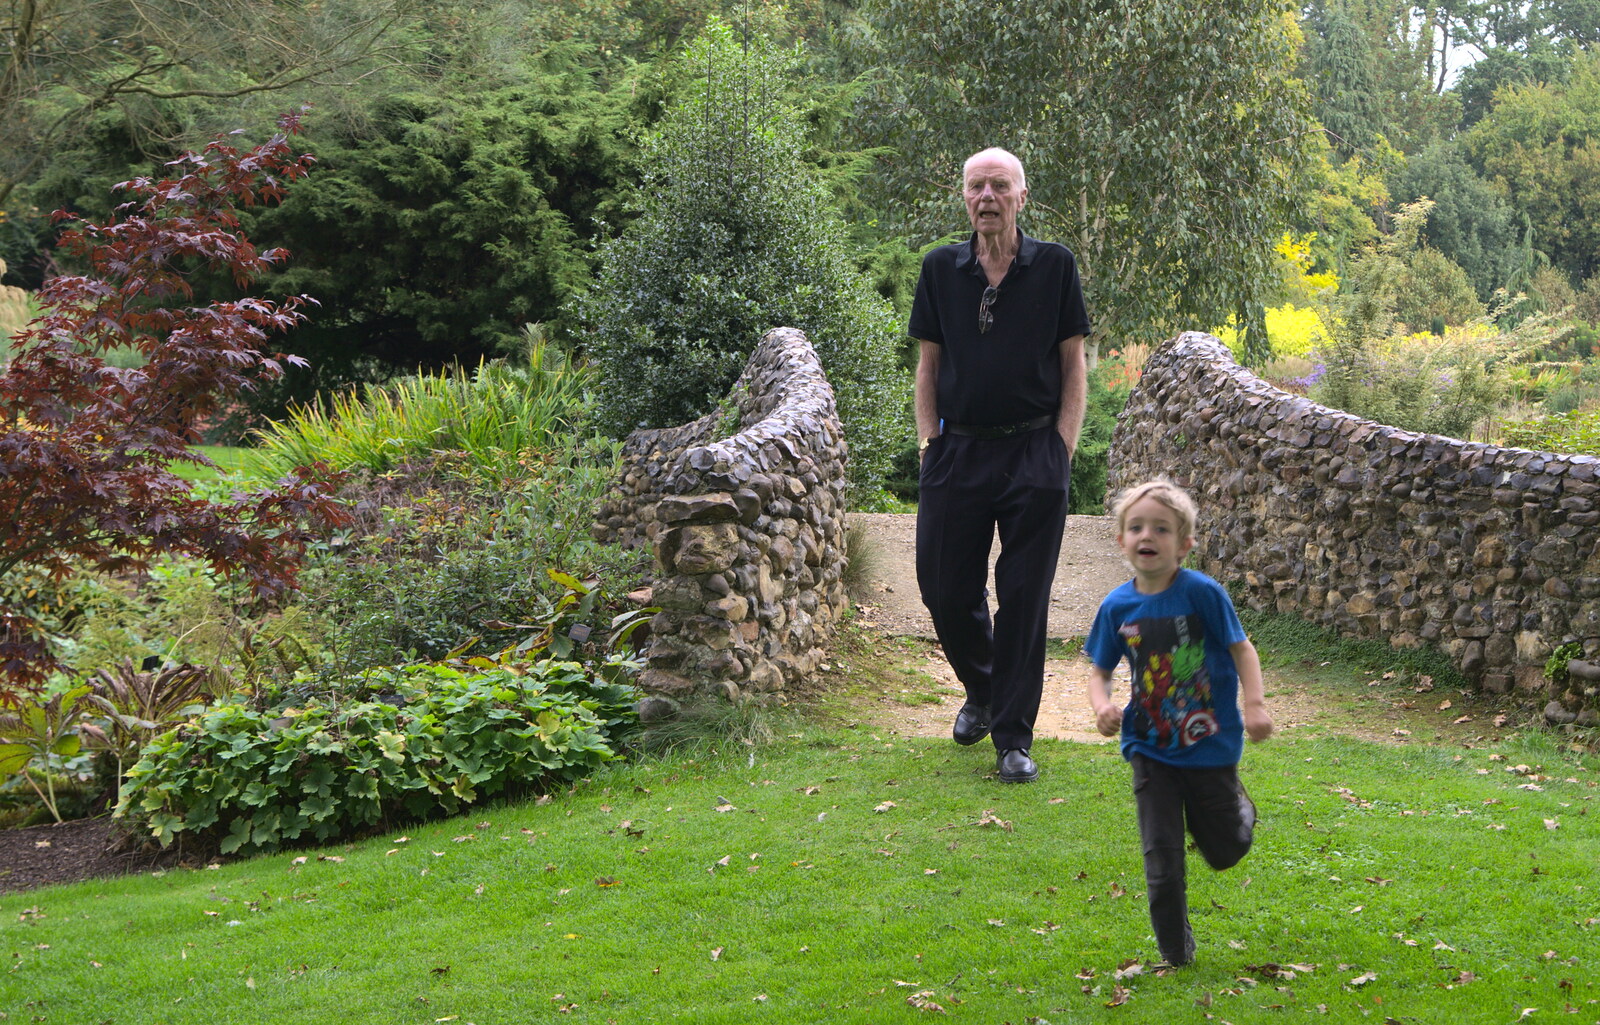 Fred runs ahead of Grandad in the gardens from A Trip to Bressingham Steam Museum, Bressingham, Norfolk - 28th September 2014